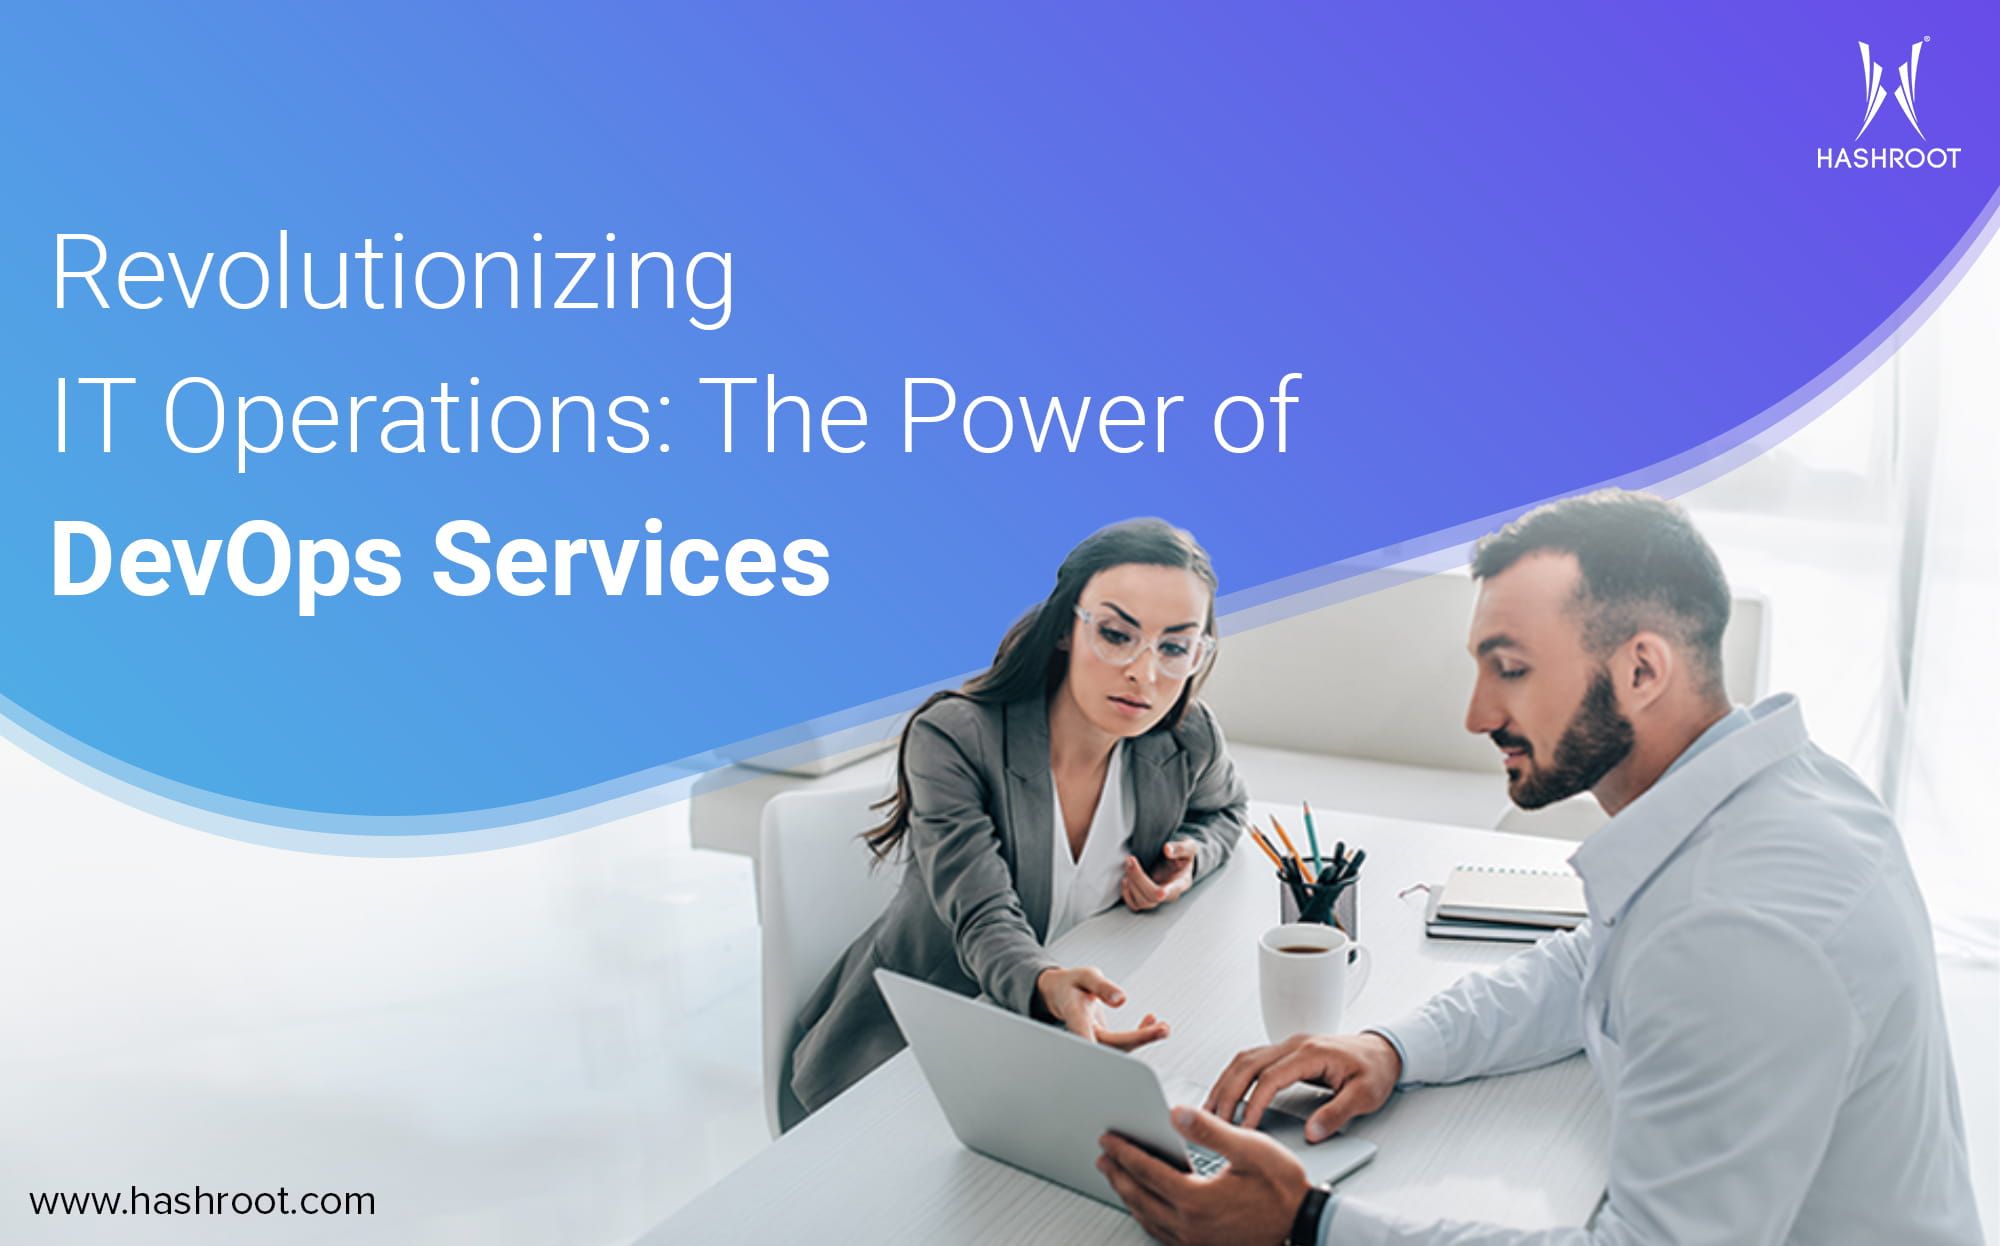 Revolutionizing IT Operations: The Power of DevOps Services